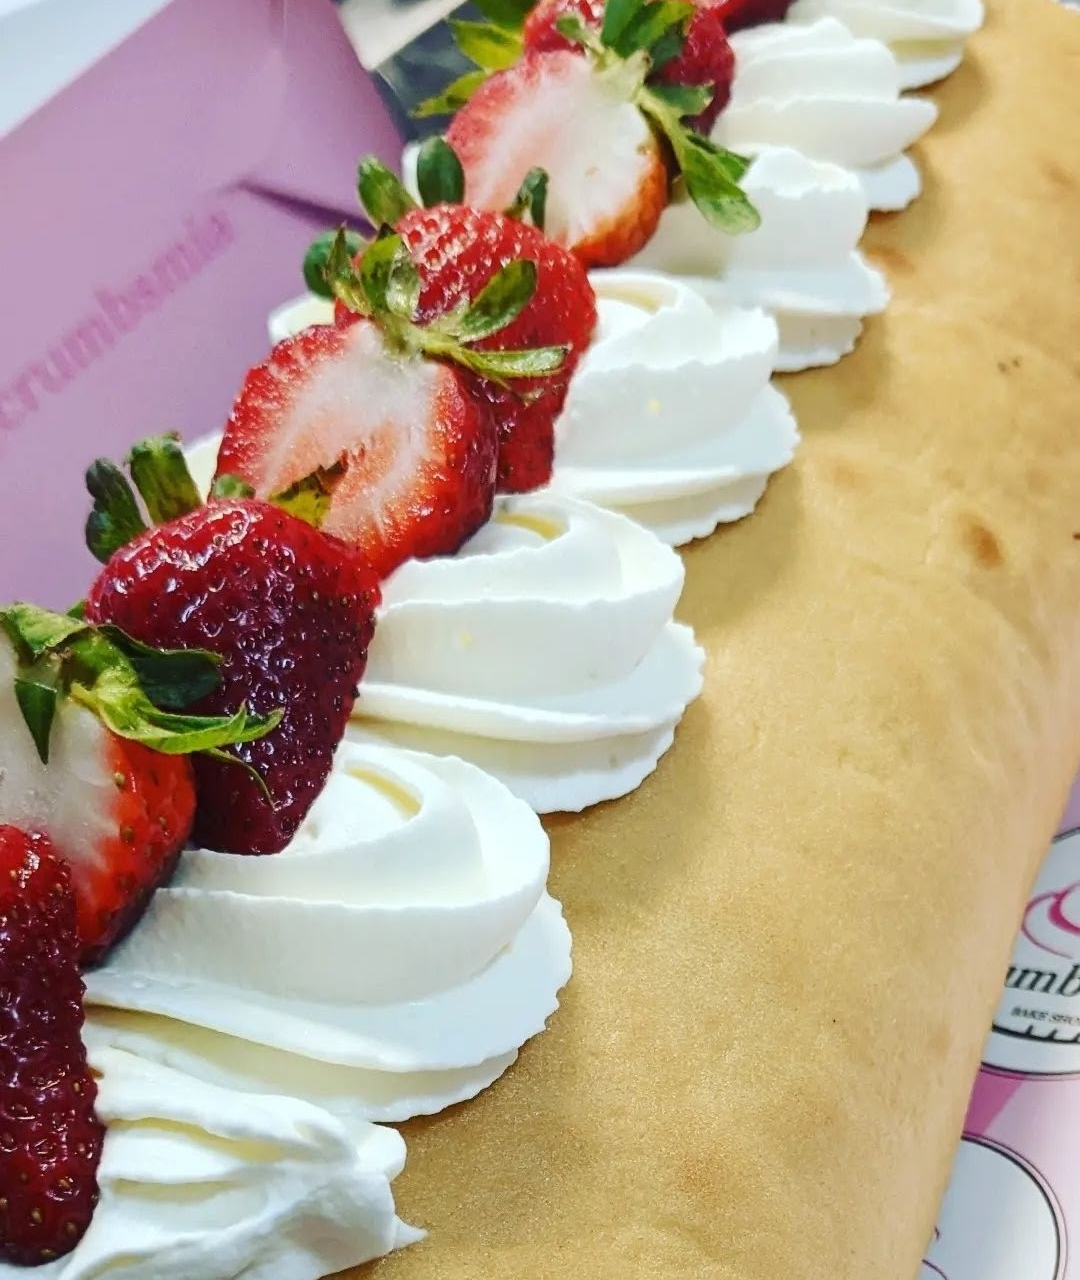 Cake roll with Chantilly and strawberries